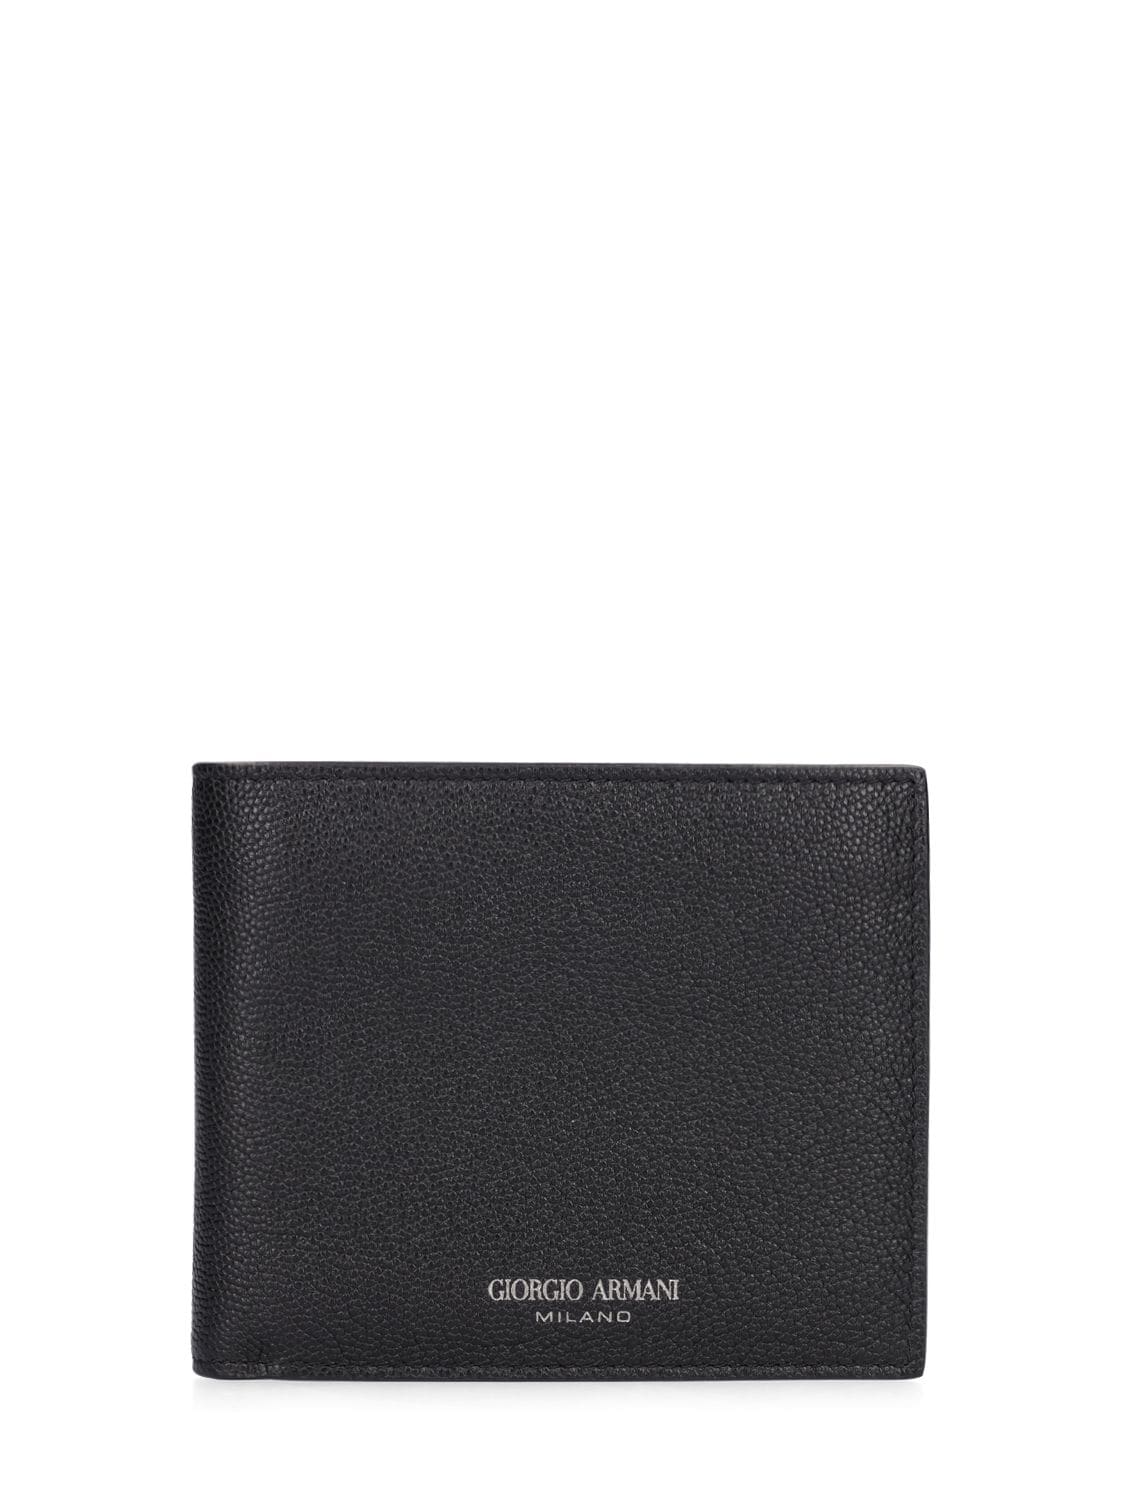 Image of Leather Bifold Wallet